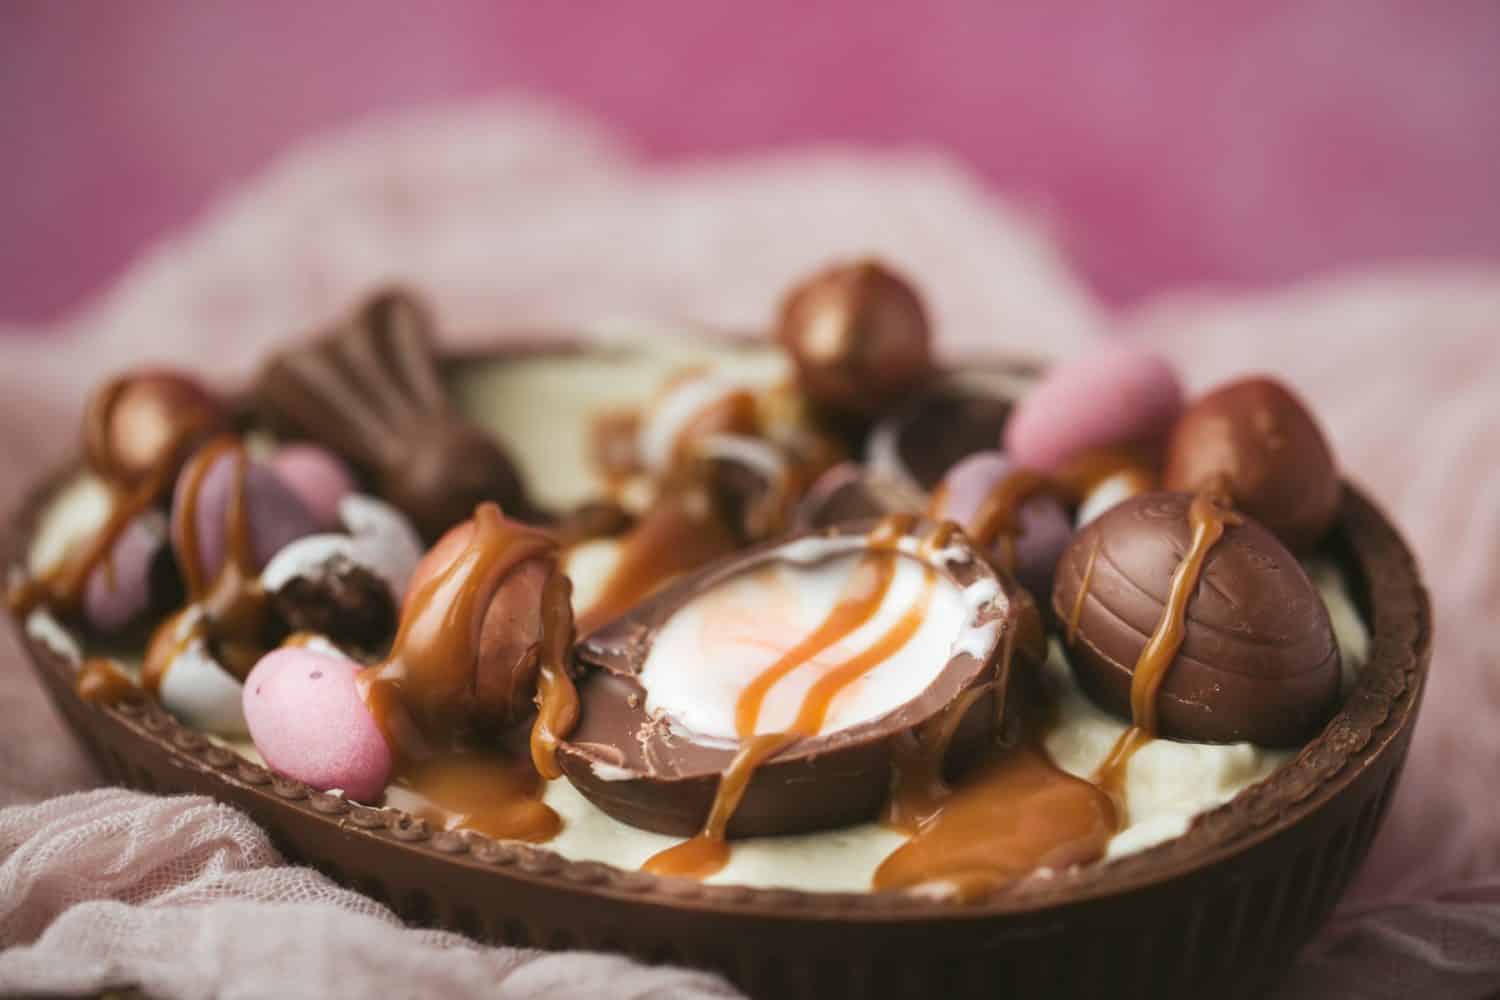 Half a large chocolate Easter egg filled with cheesecake and topped with Easter chocolate. 